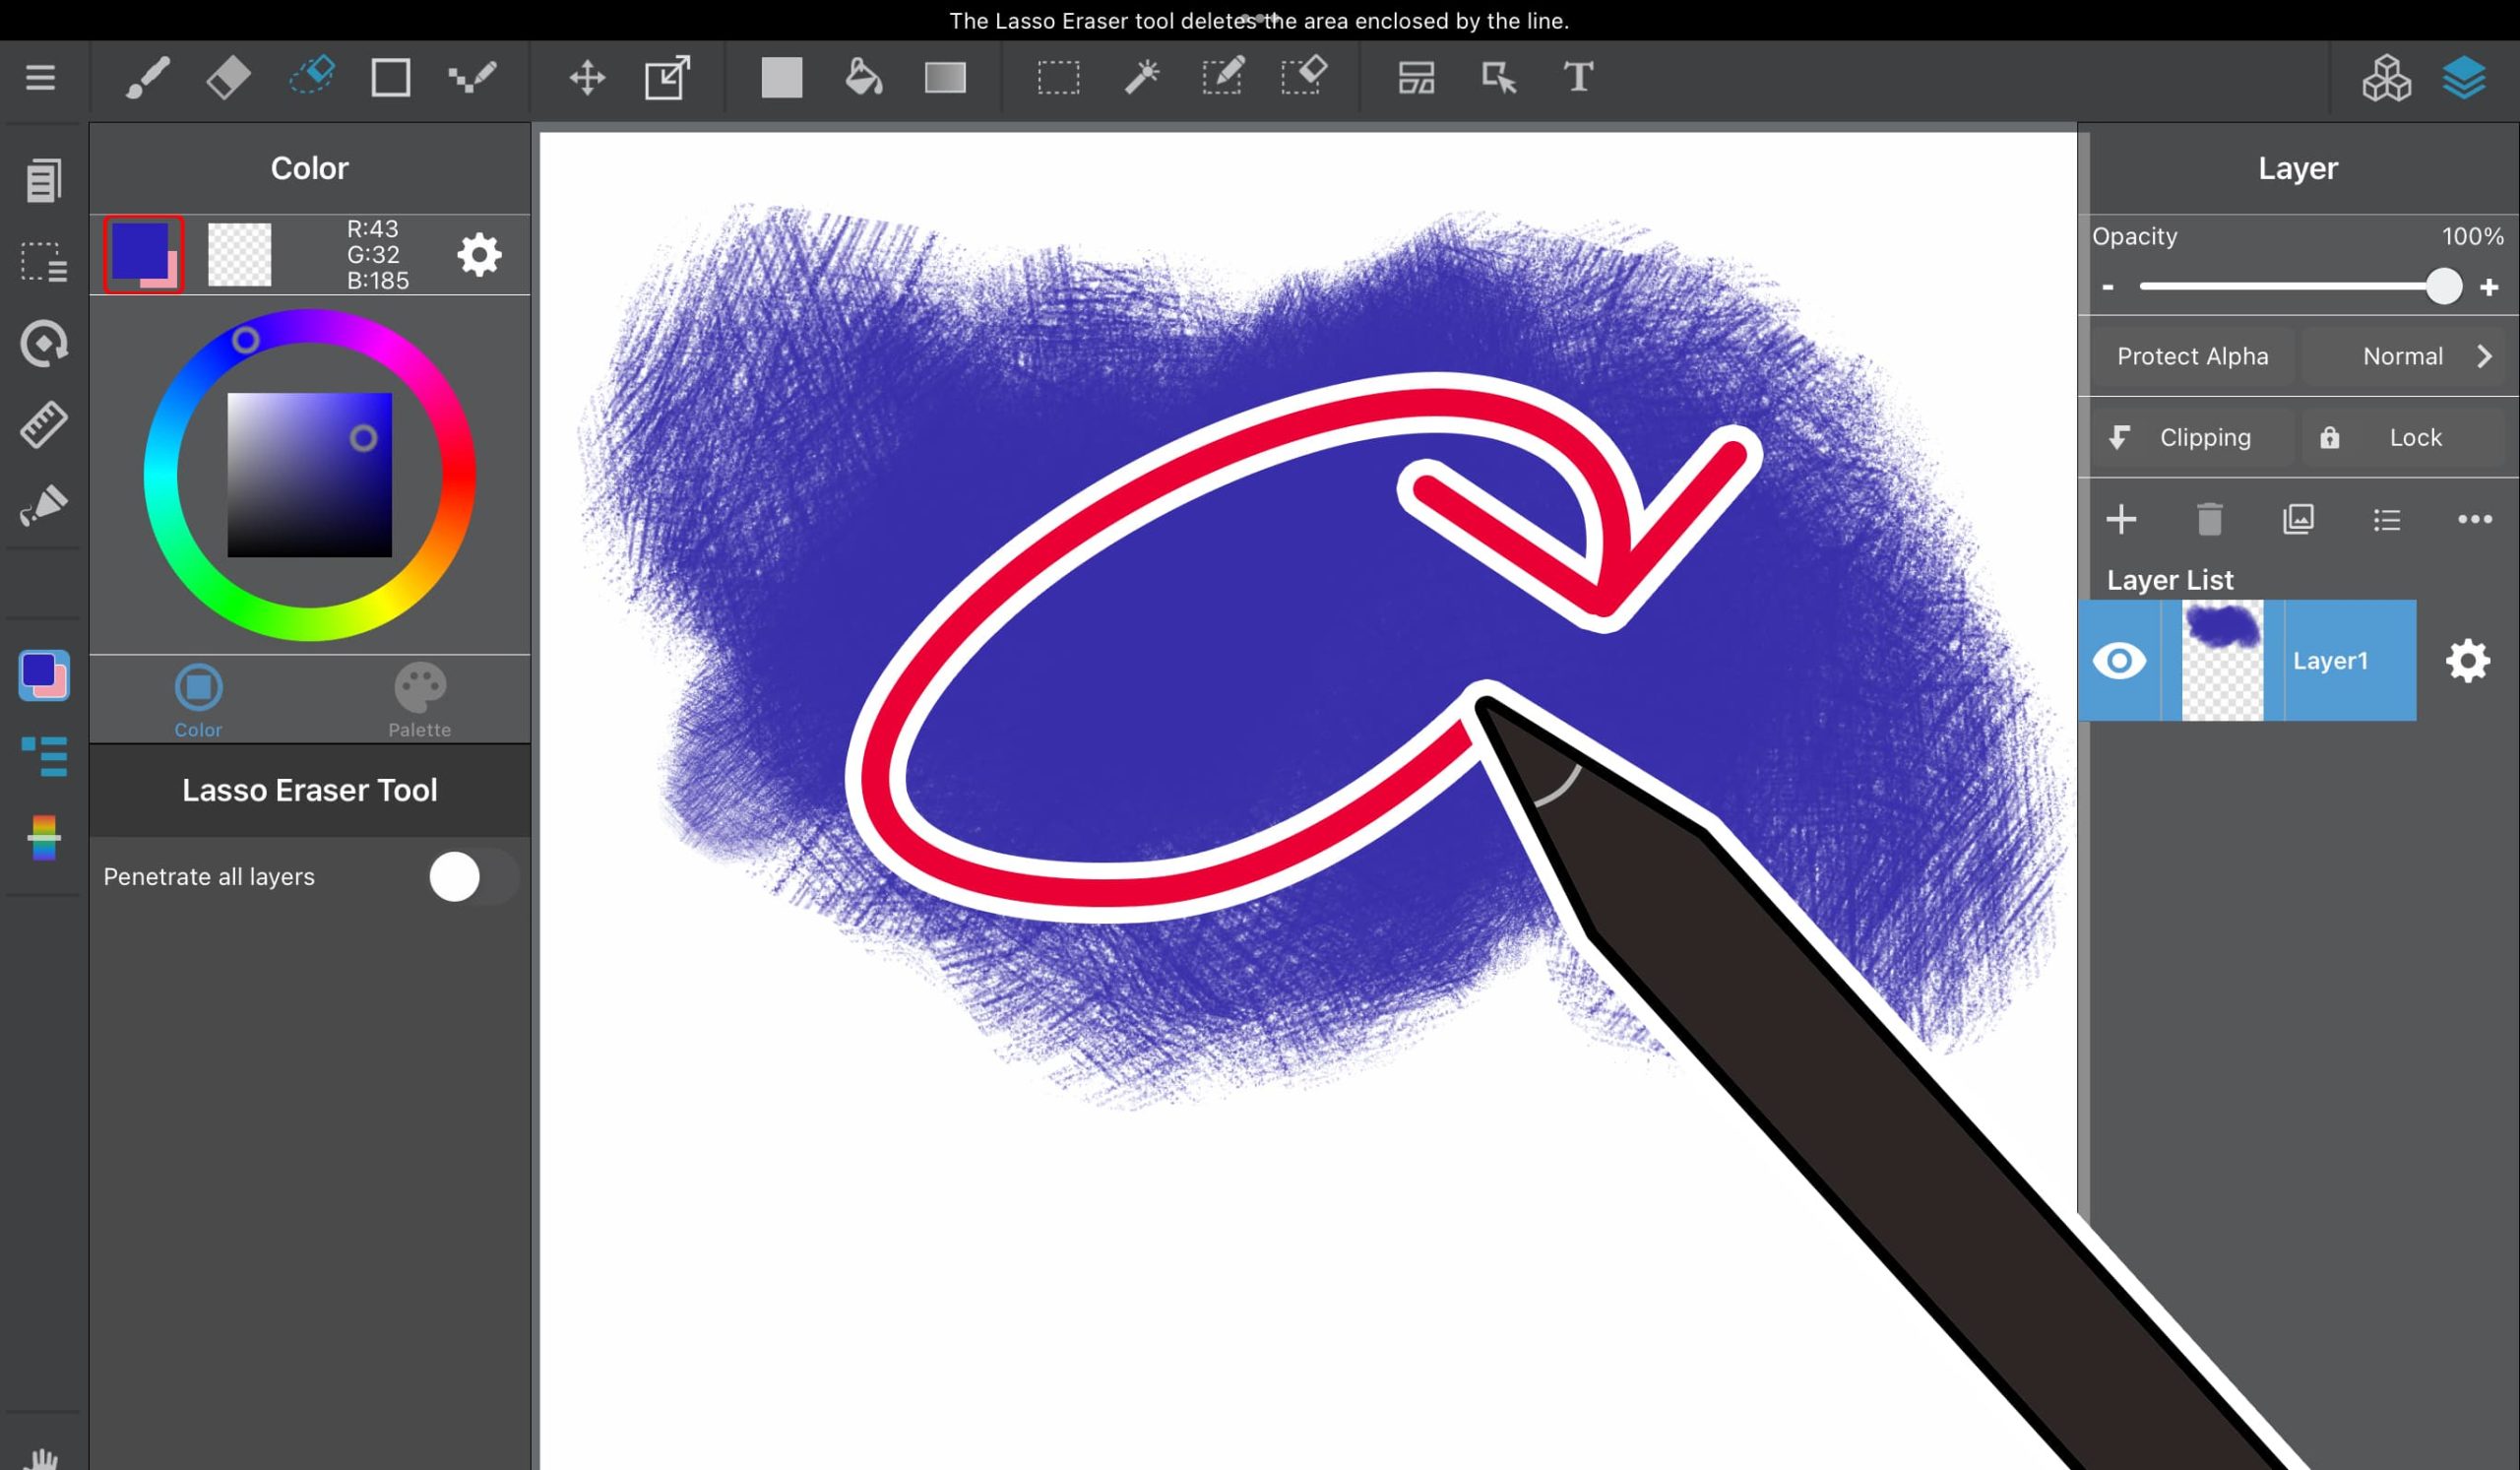 [iPad] How to Use the Eraser(Lasso) Tool